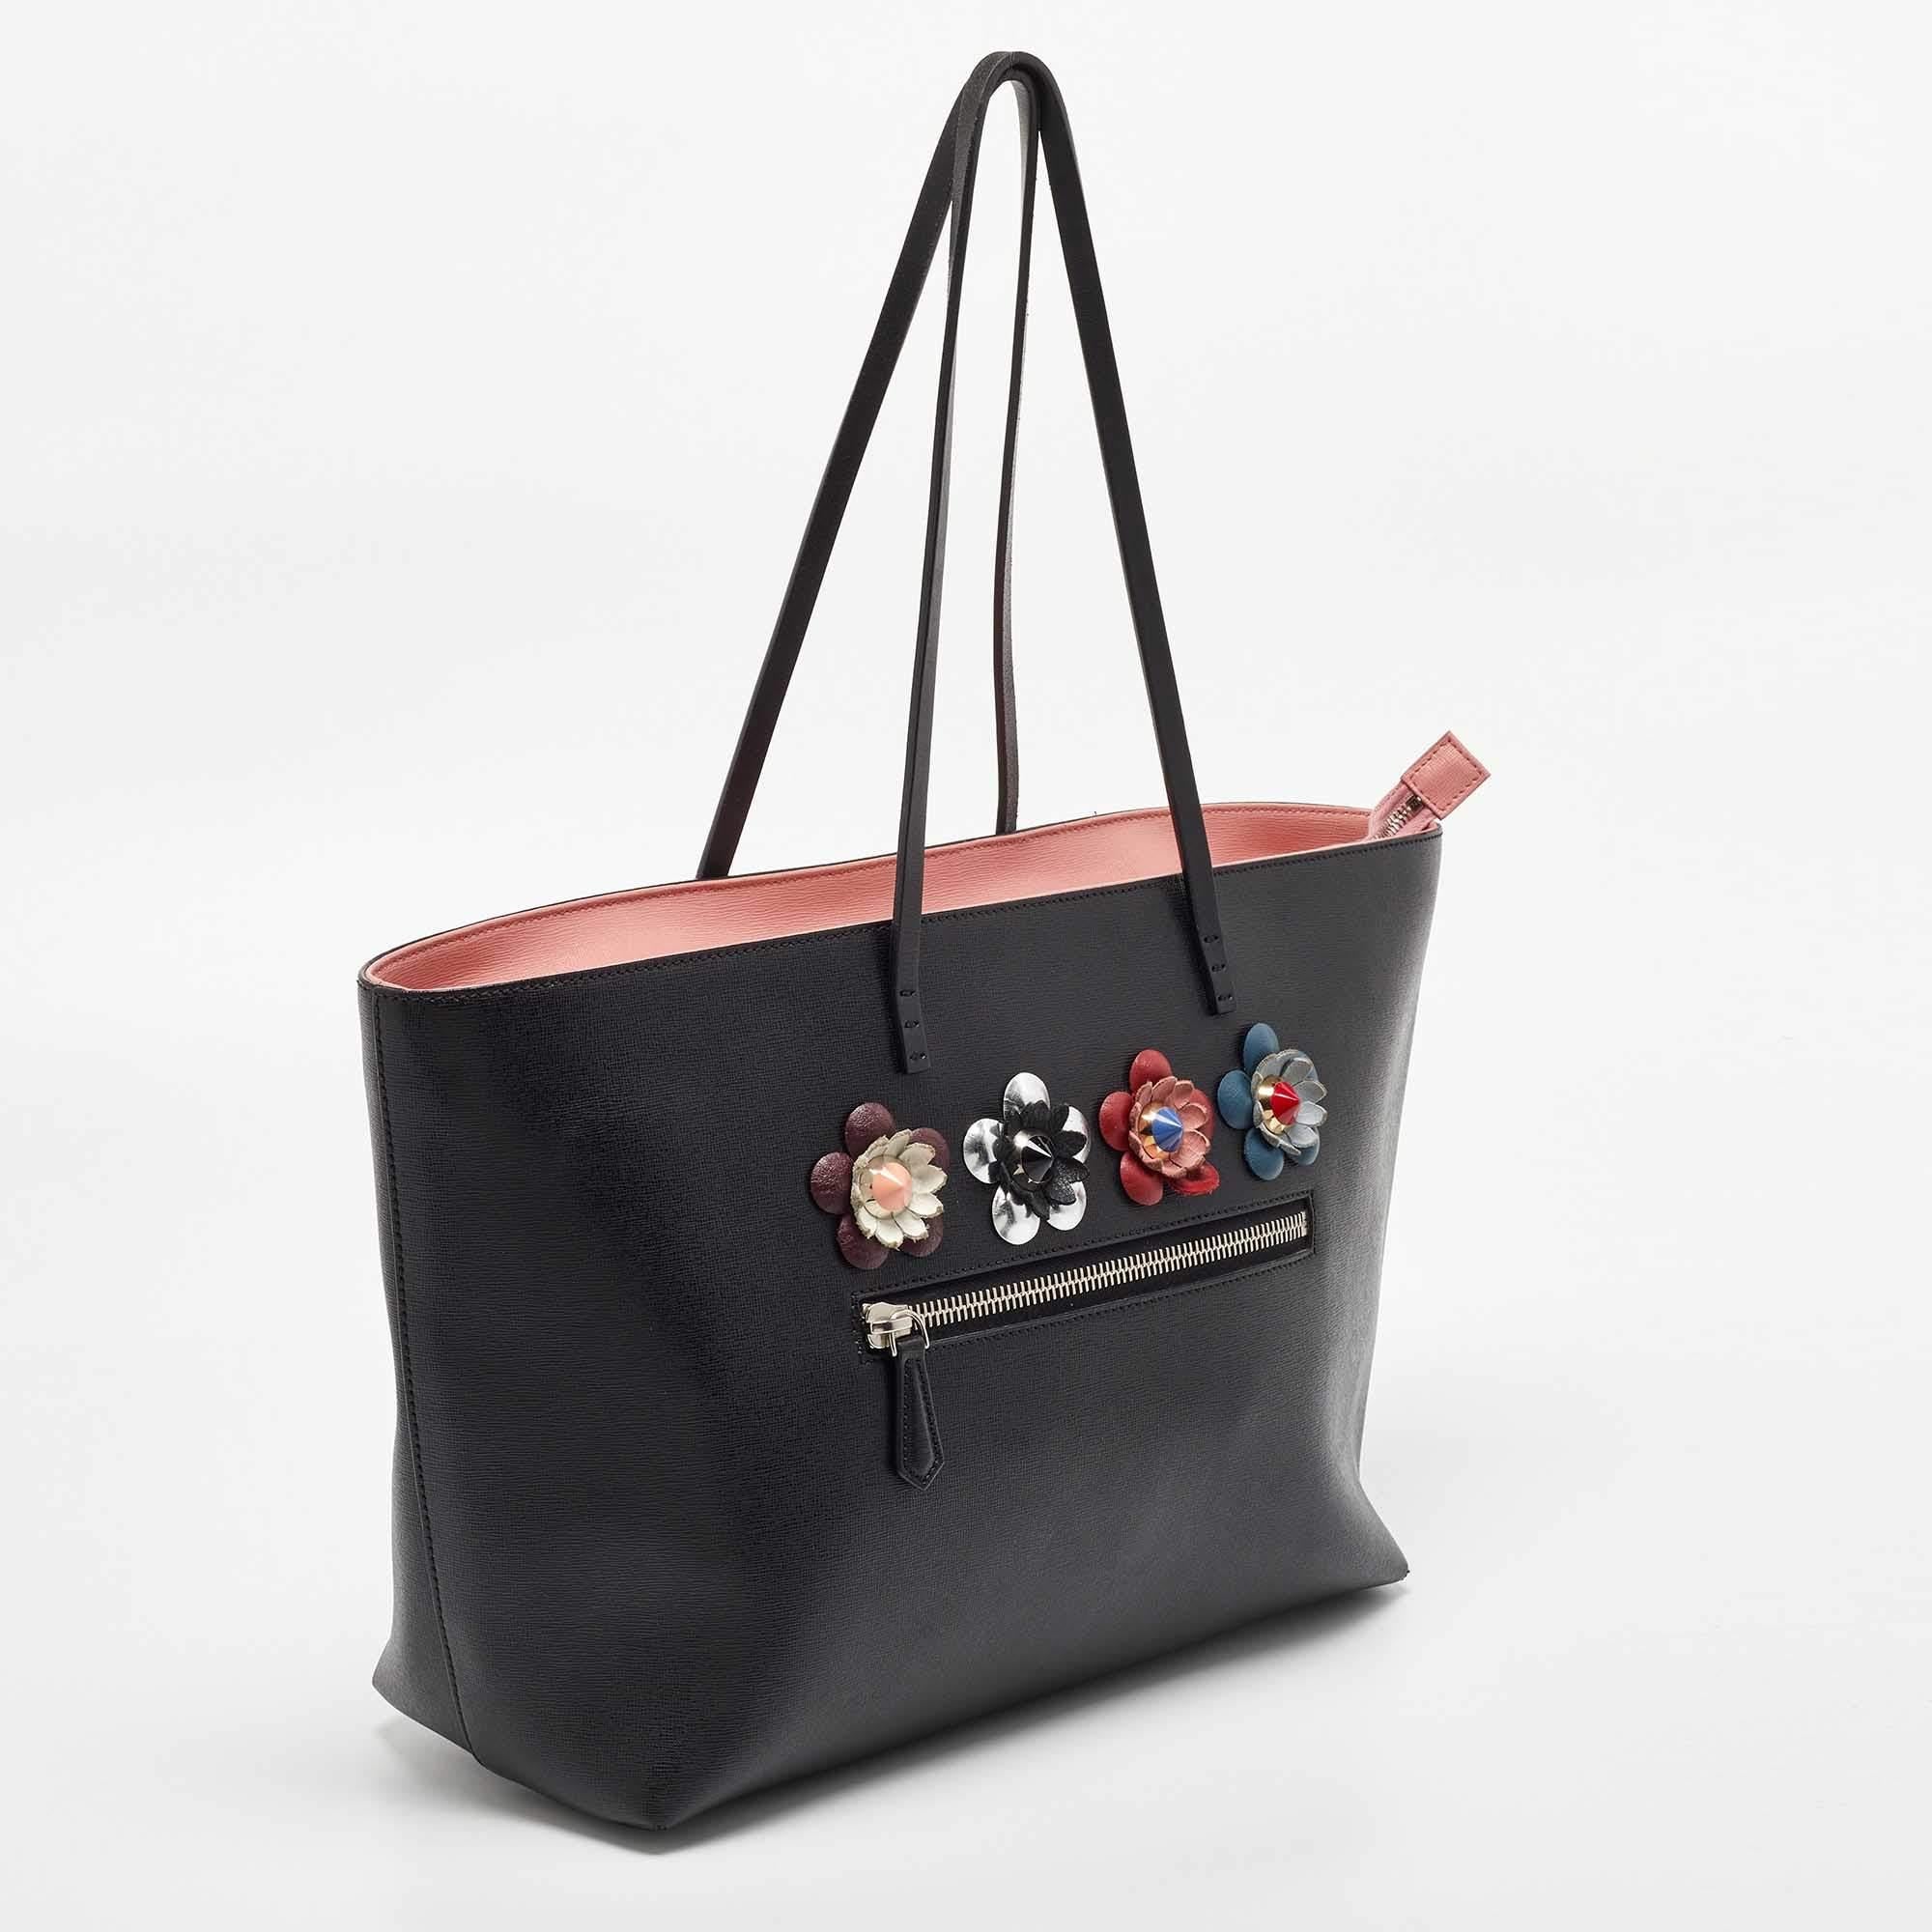 Fendi Black/Peach Leather Monster Roll Tote For Sale 7